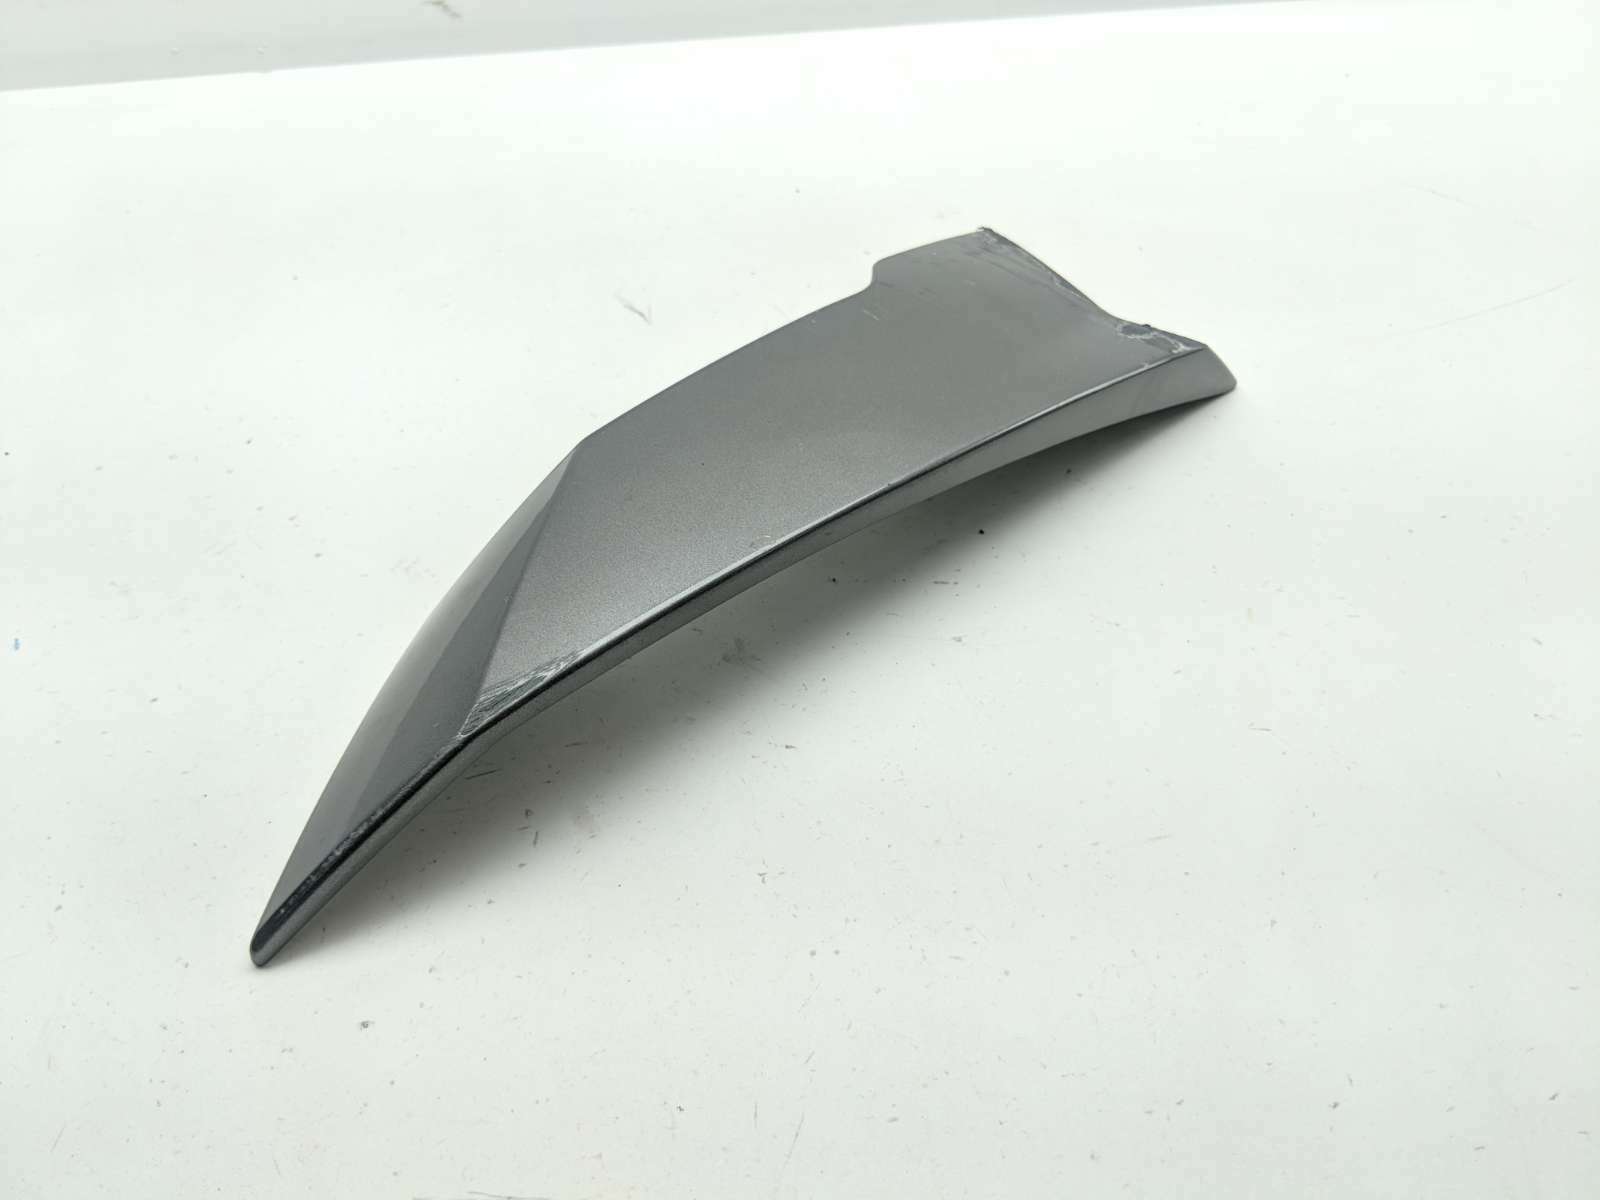 12 BMW R 1200 RT Rear Right Tail Fairing Cover